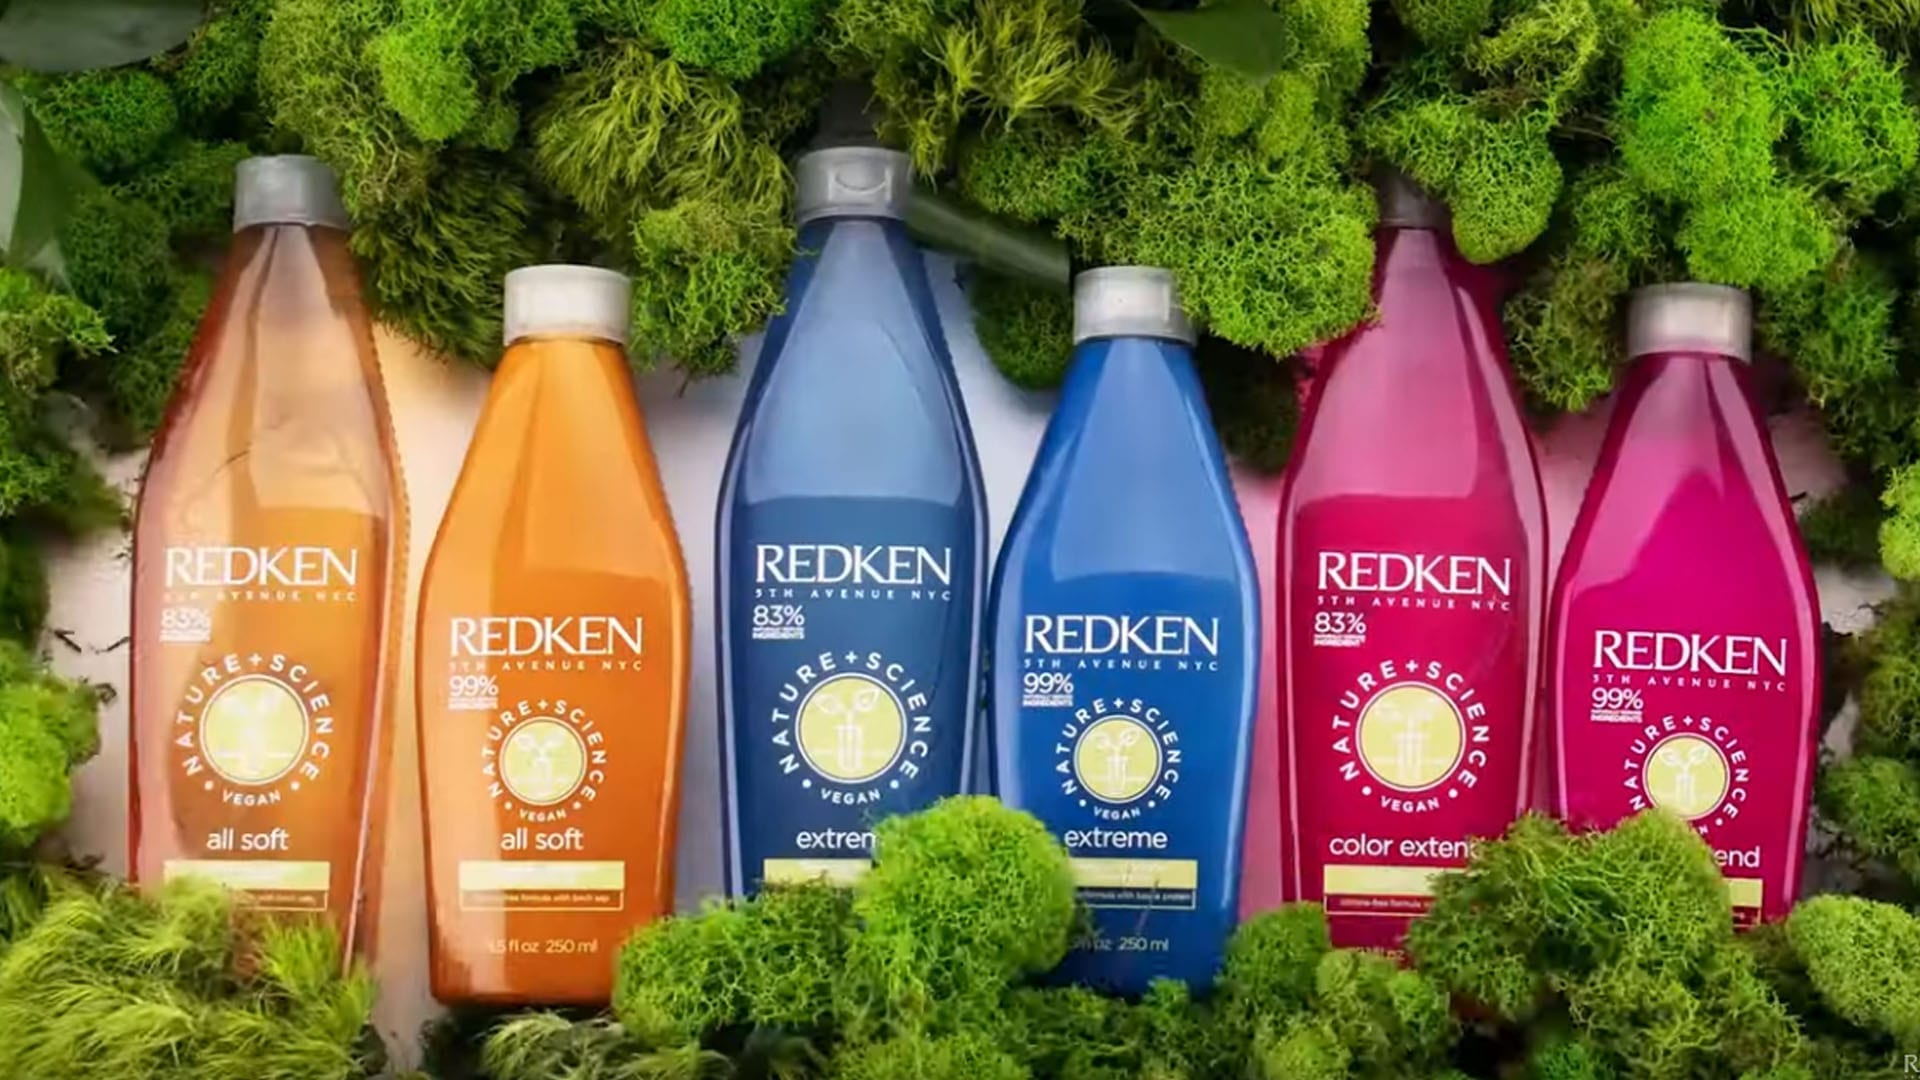 Redken-Style-Products-Nature-Science-Full-Lenght-#MMCSTYLE-5